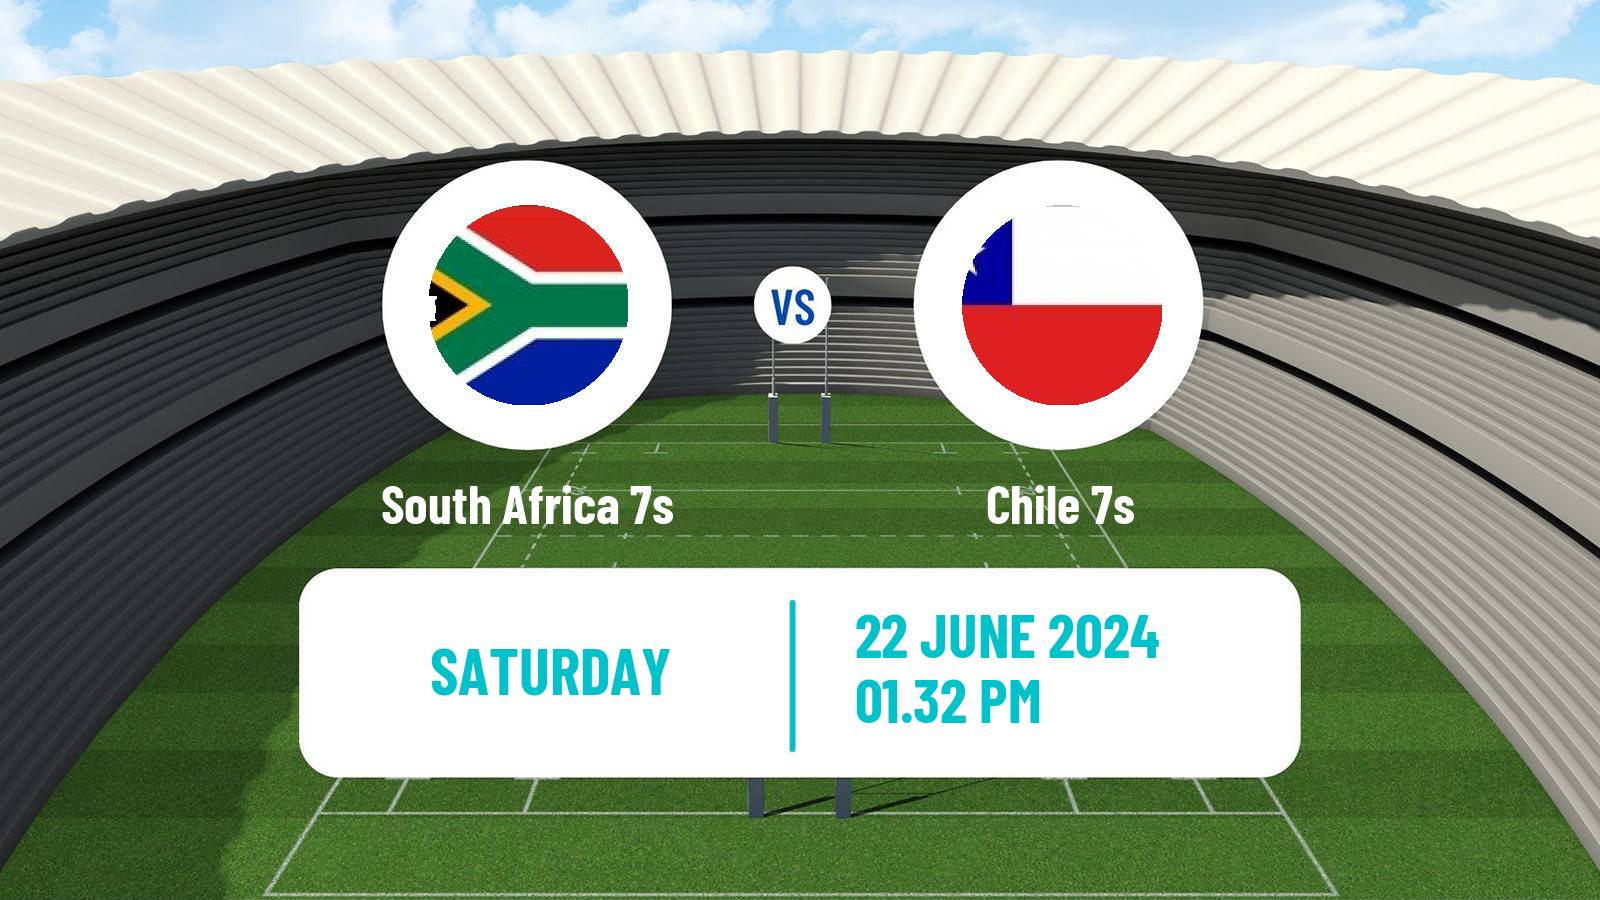 Rugby union Olympic Games 7s Rugby South Africa 7s - Chile 7s